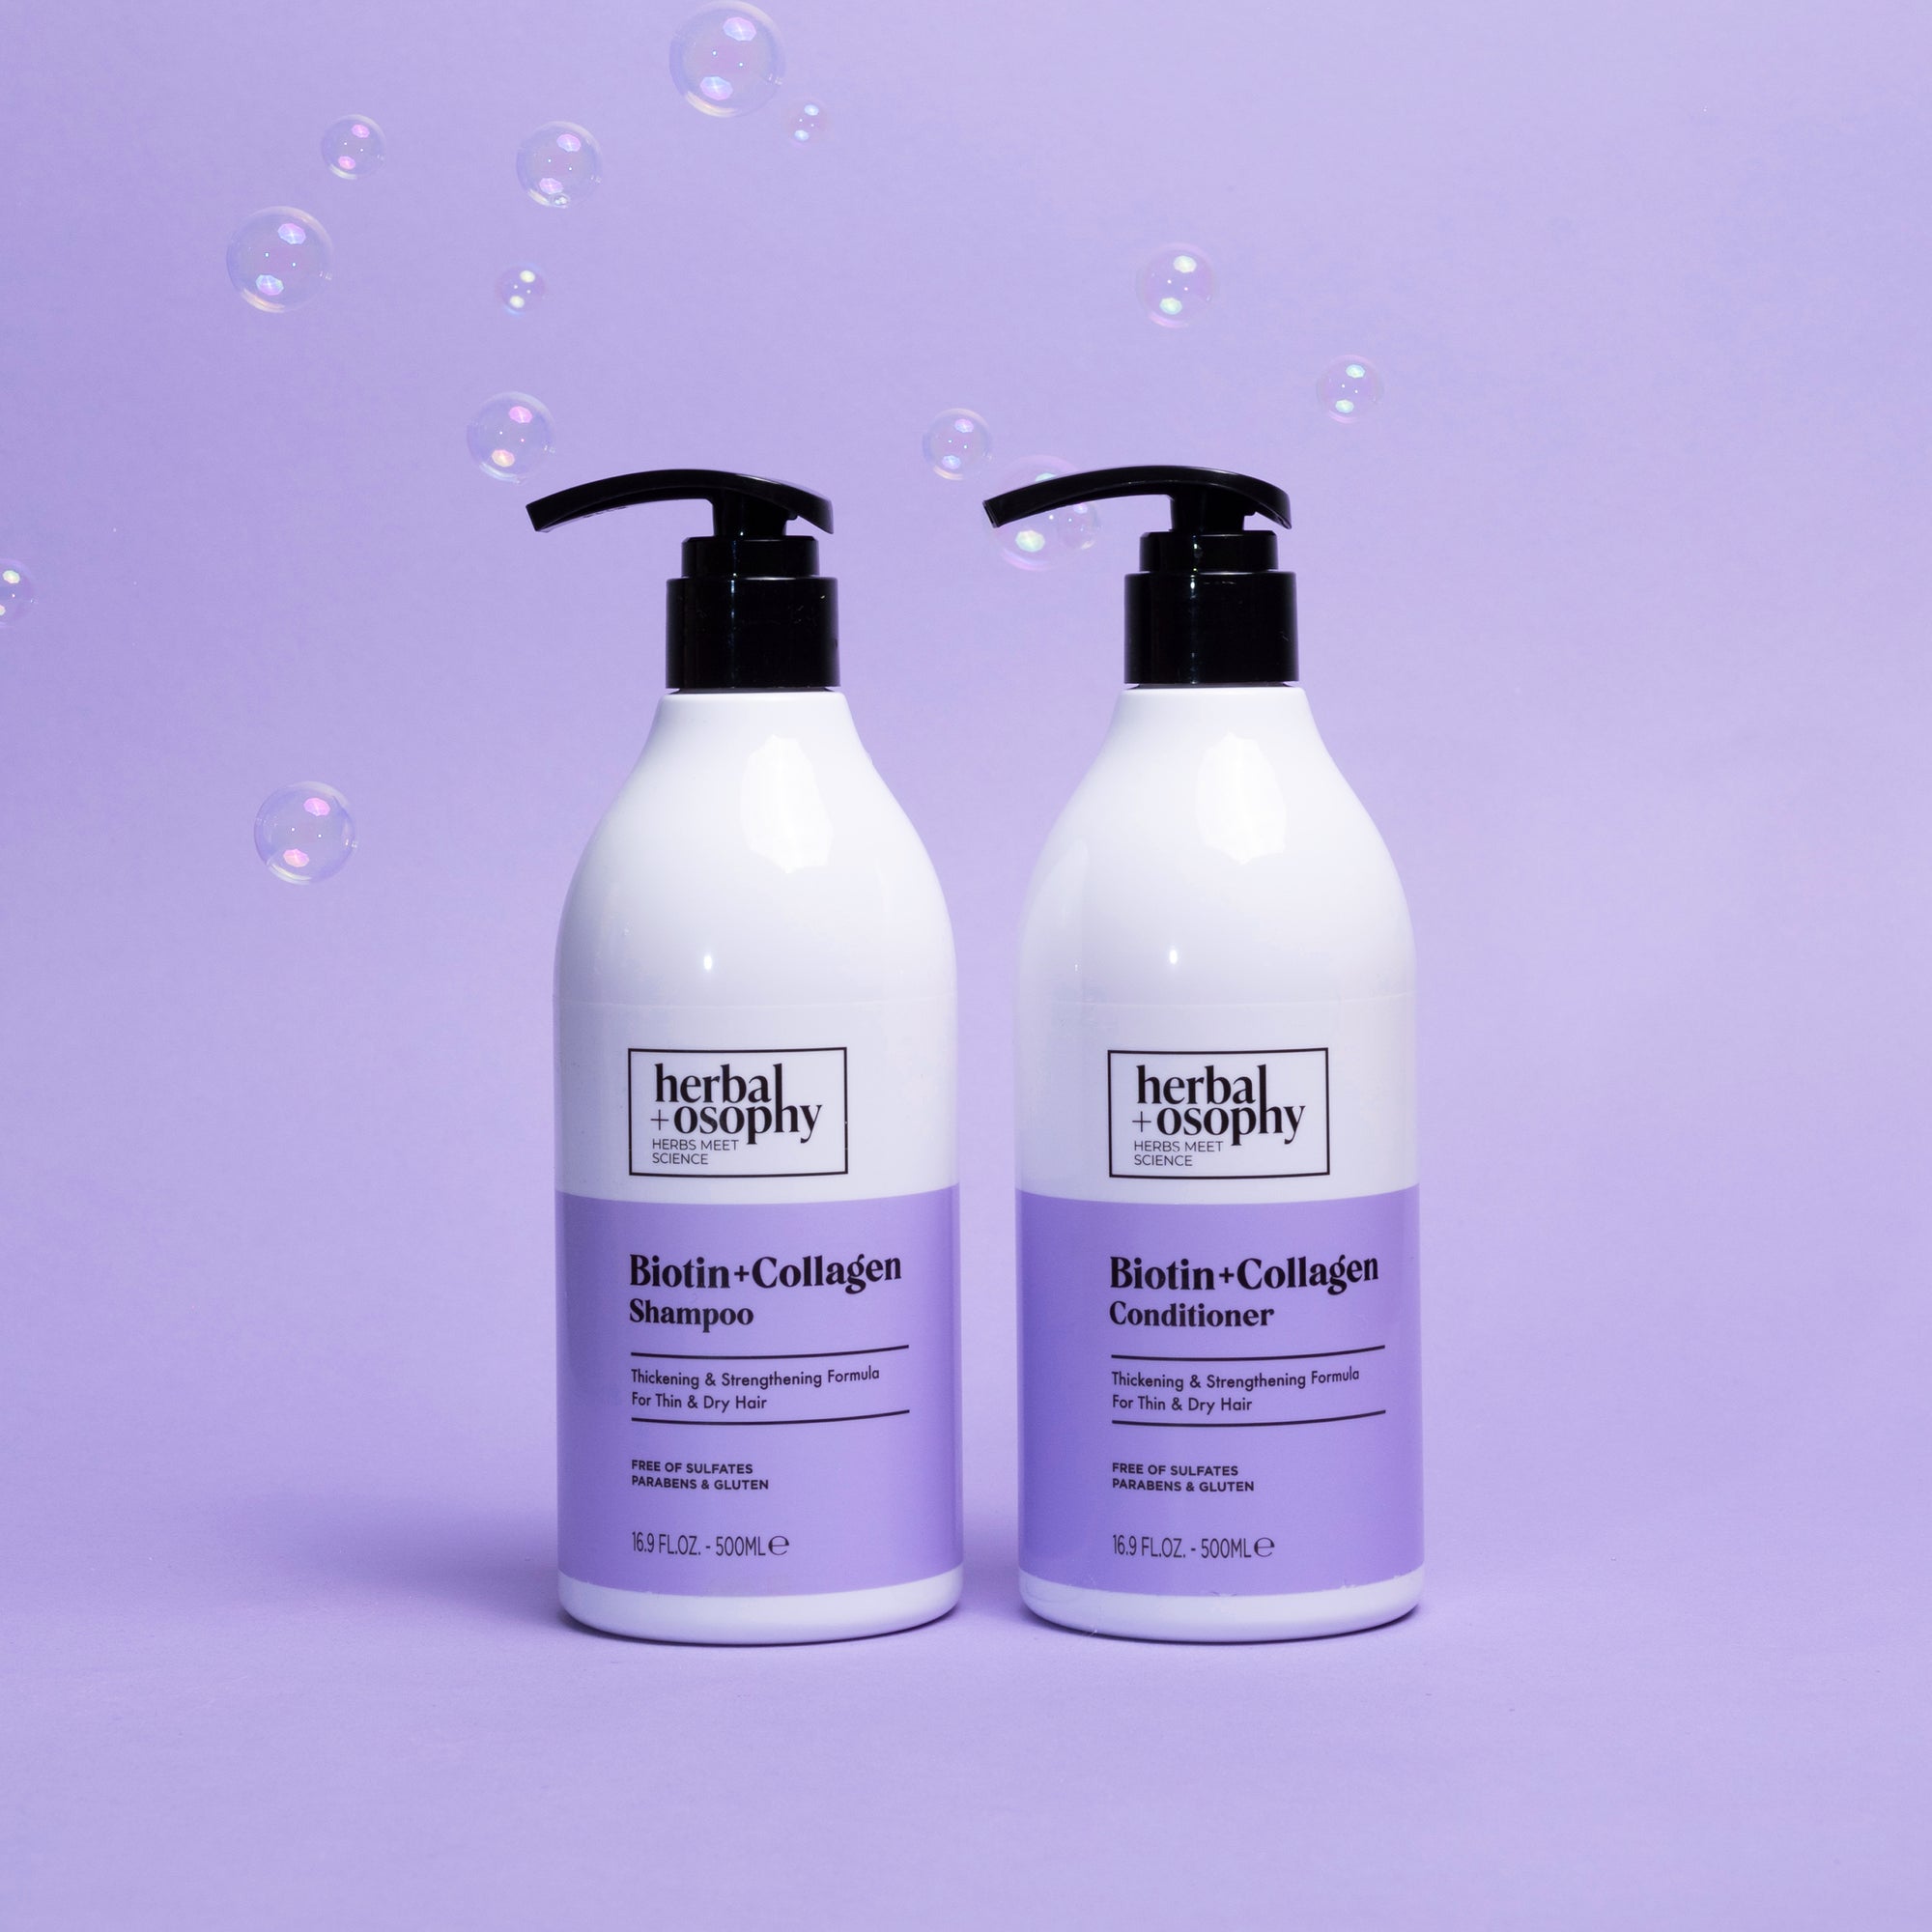 Biotin + Collagen Shampoo and Conditioner bottles on a purple background with bubbles